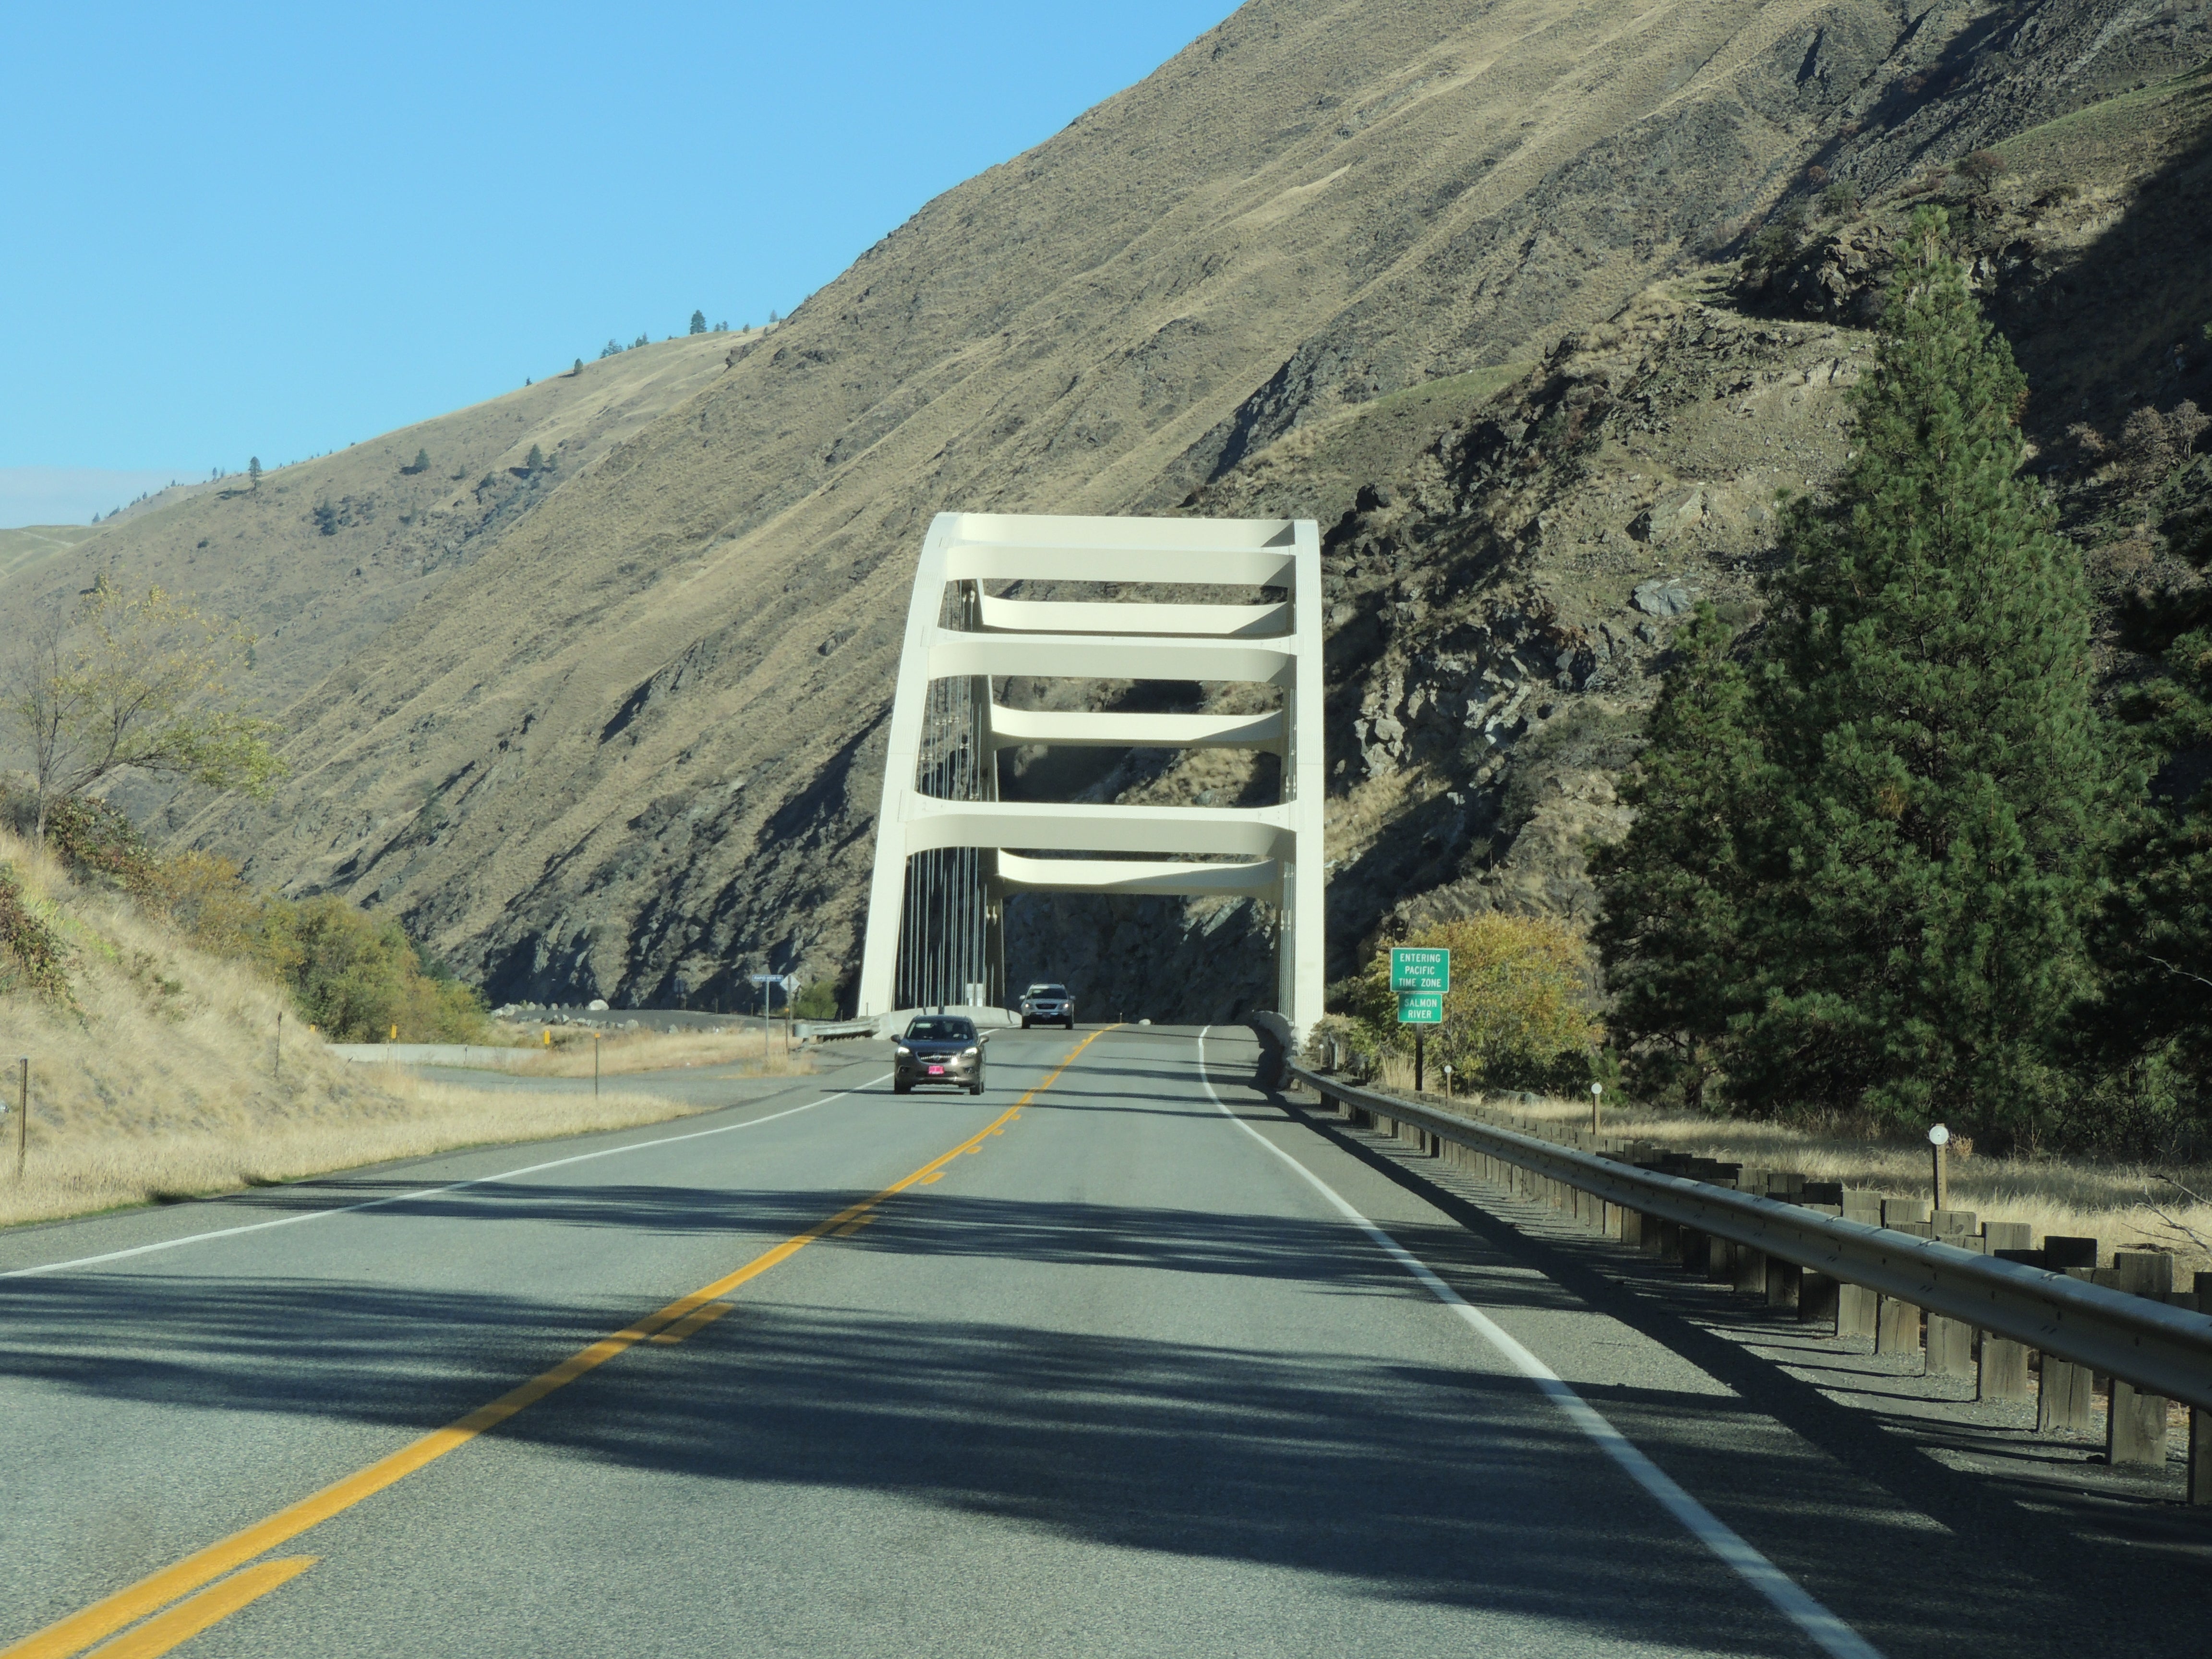 On the road past Riggins, ID down river. 